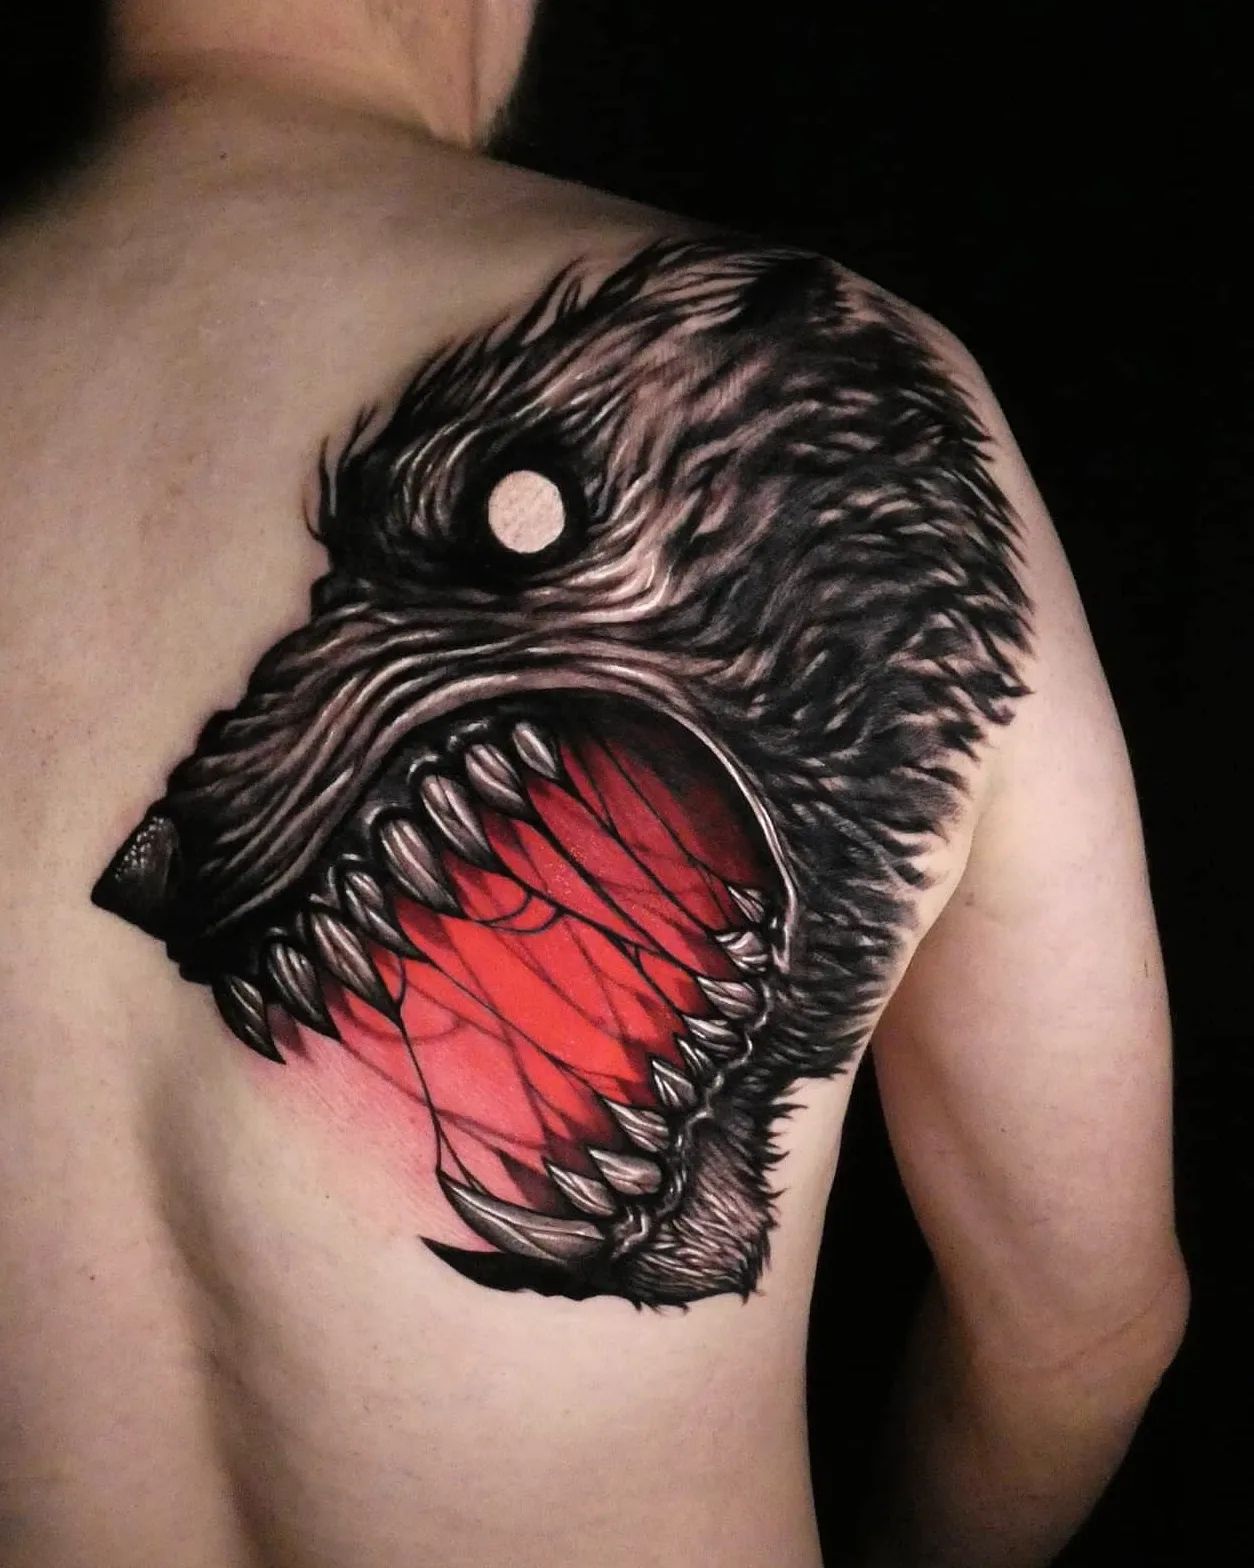 Get this monstrous wolf tattoo and show others that you can turn into it if you get mad.